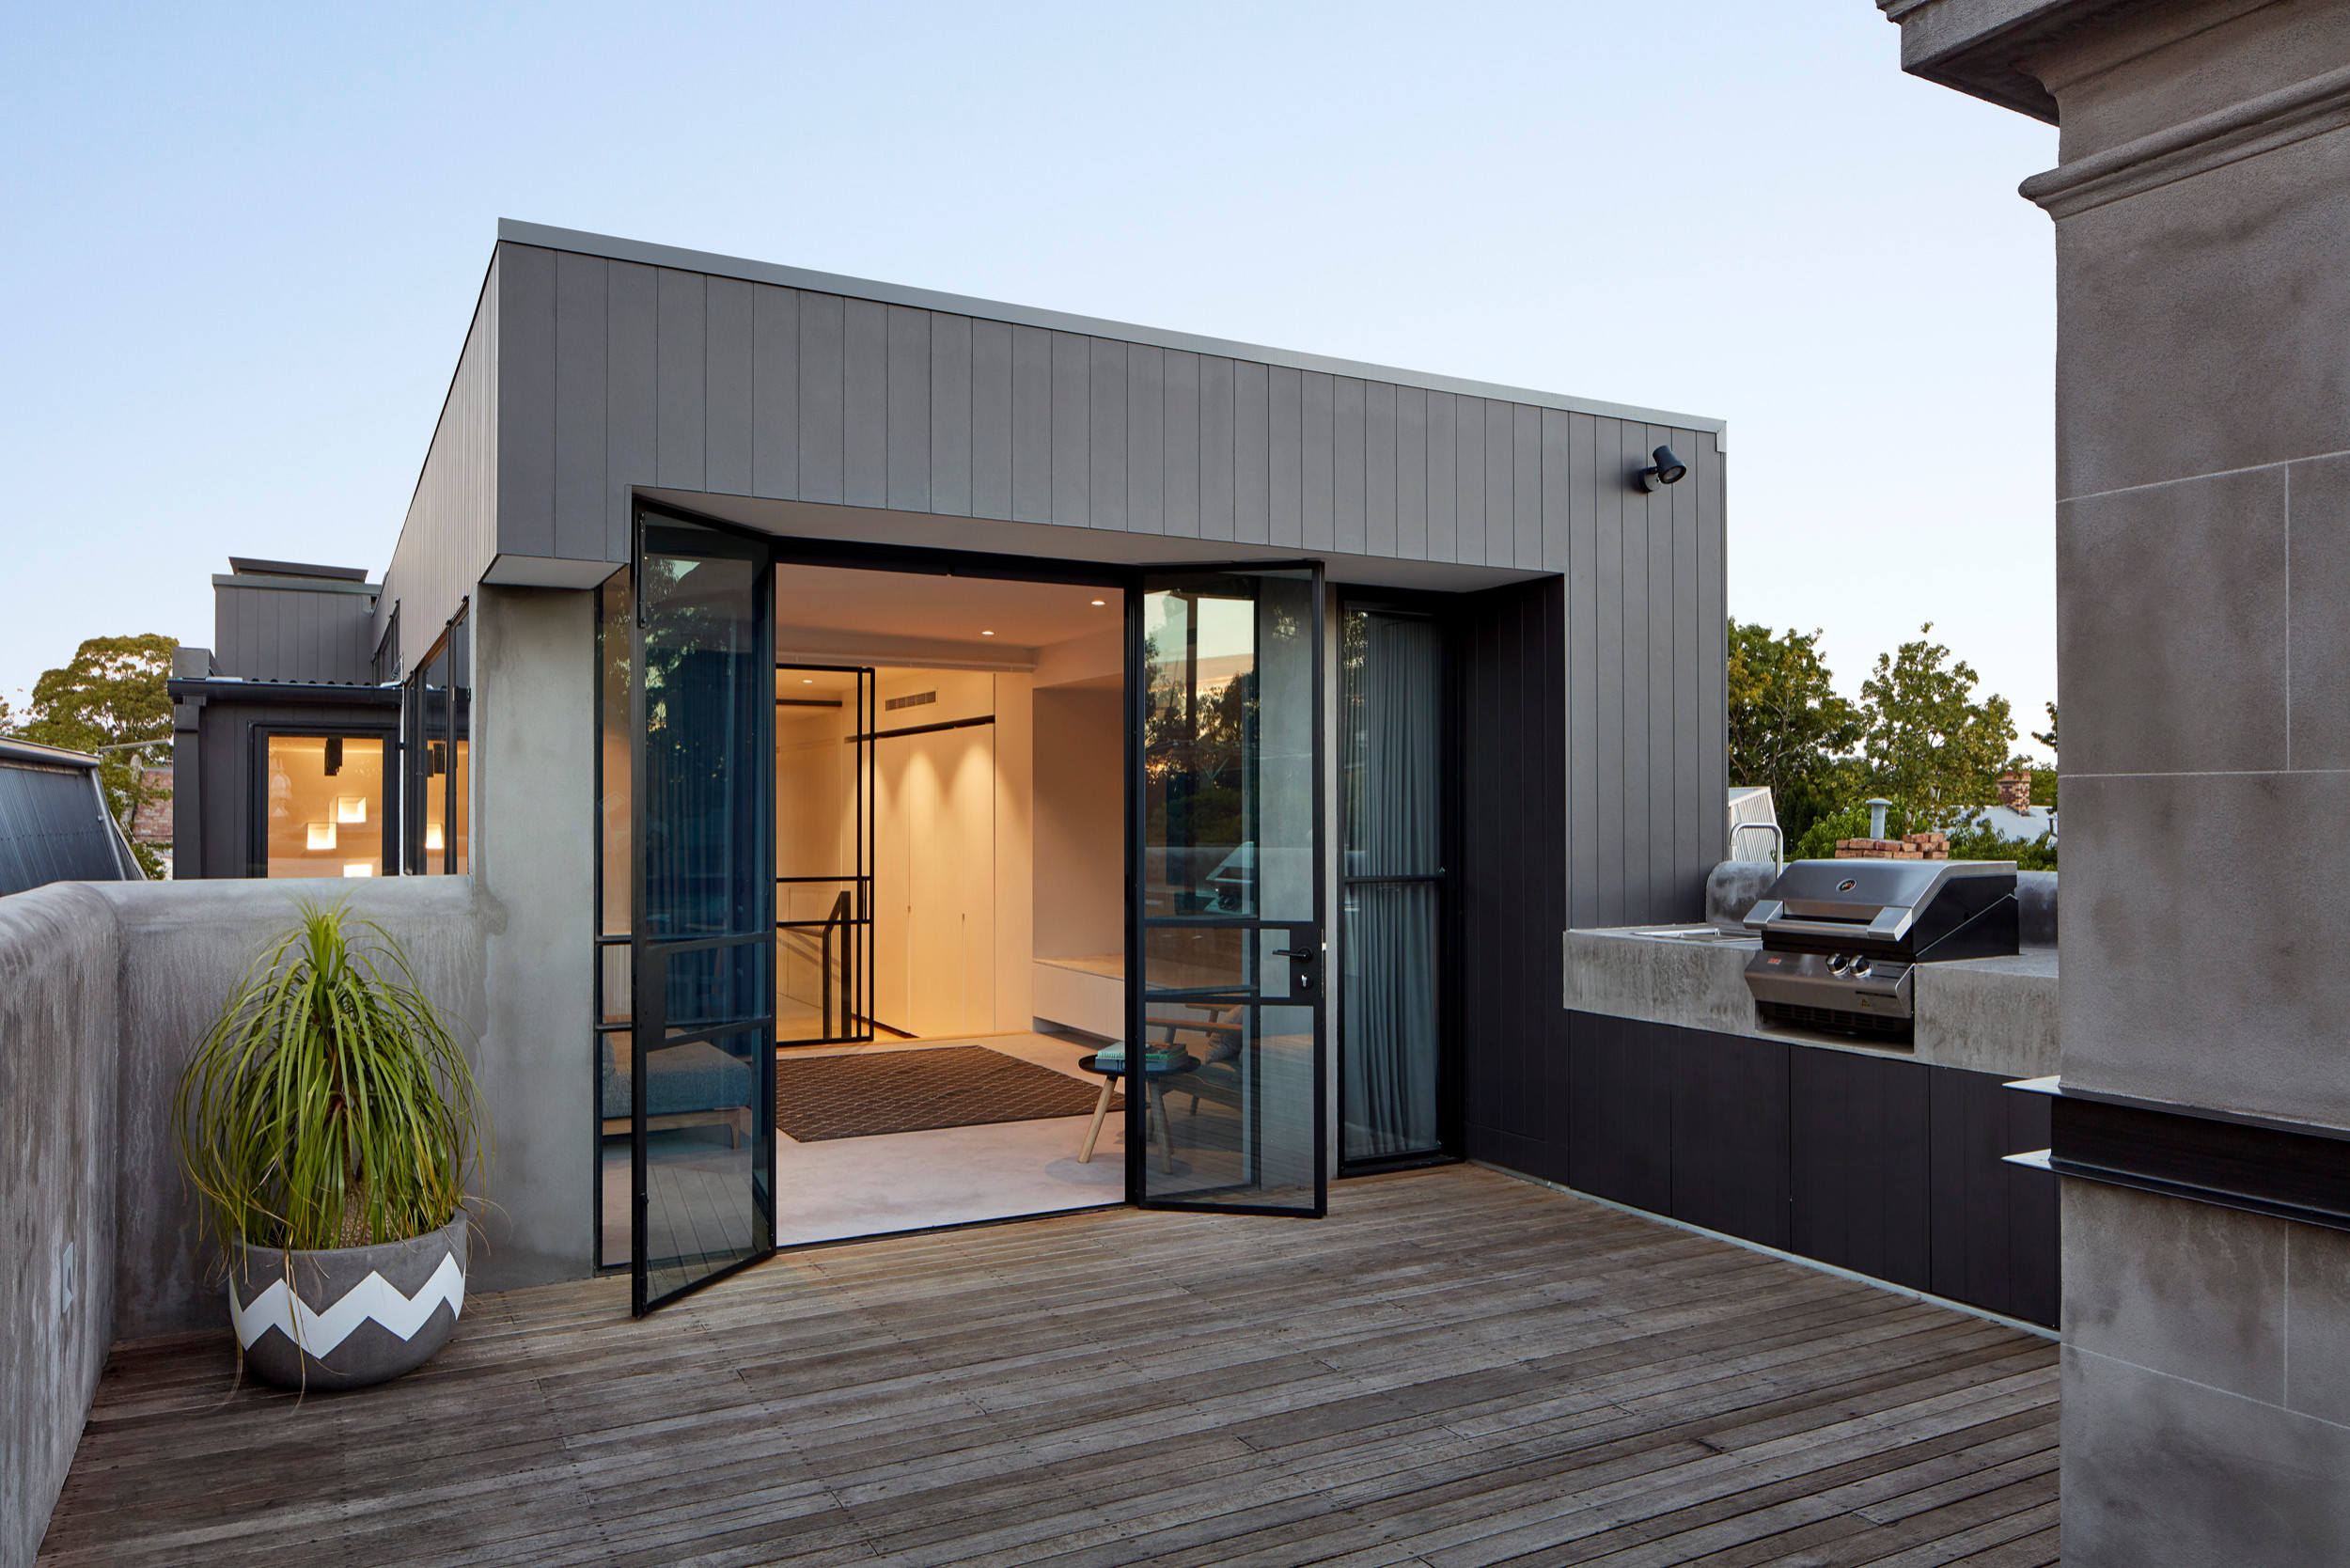 13 Questions to Ask Before Building a Rooftop | Houzz